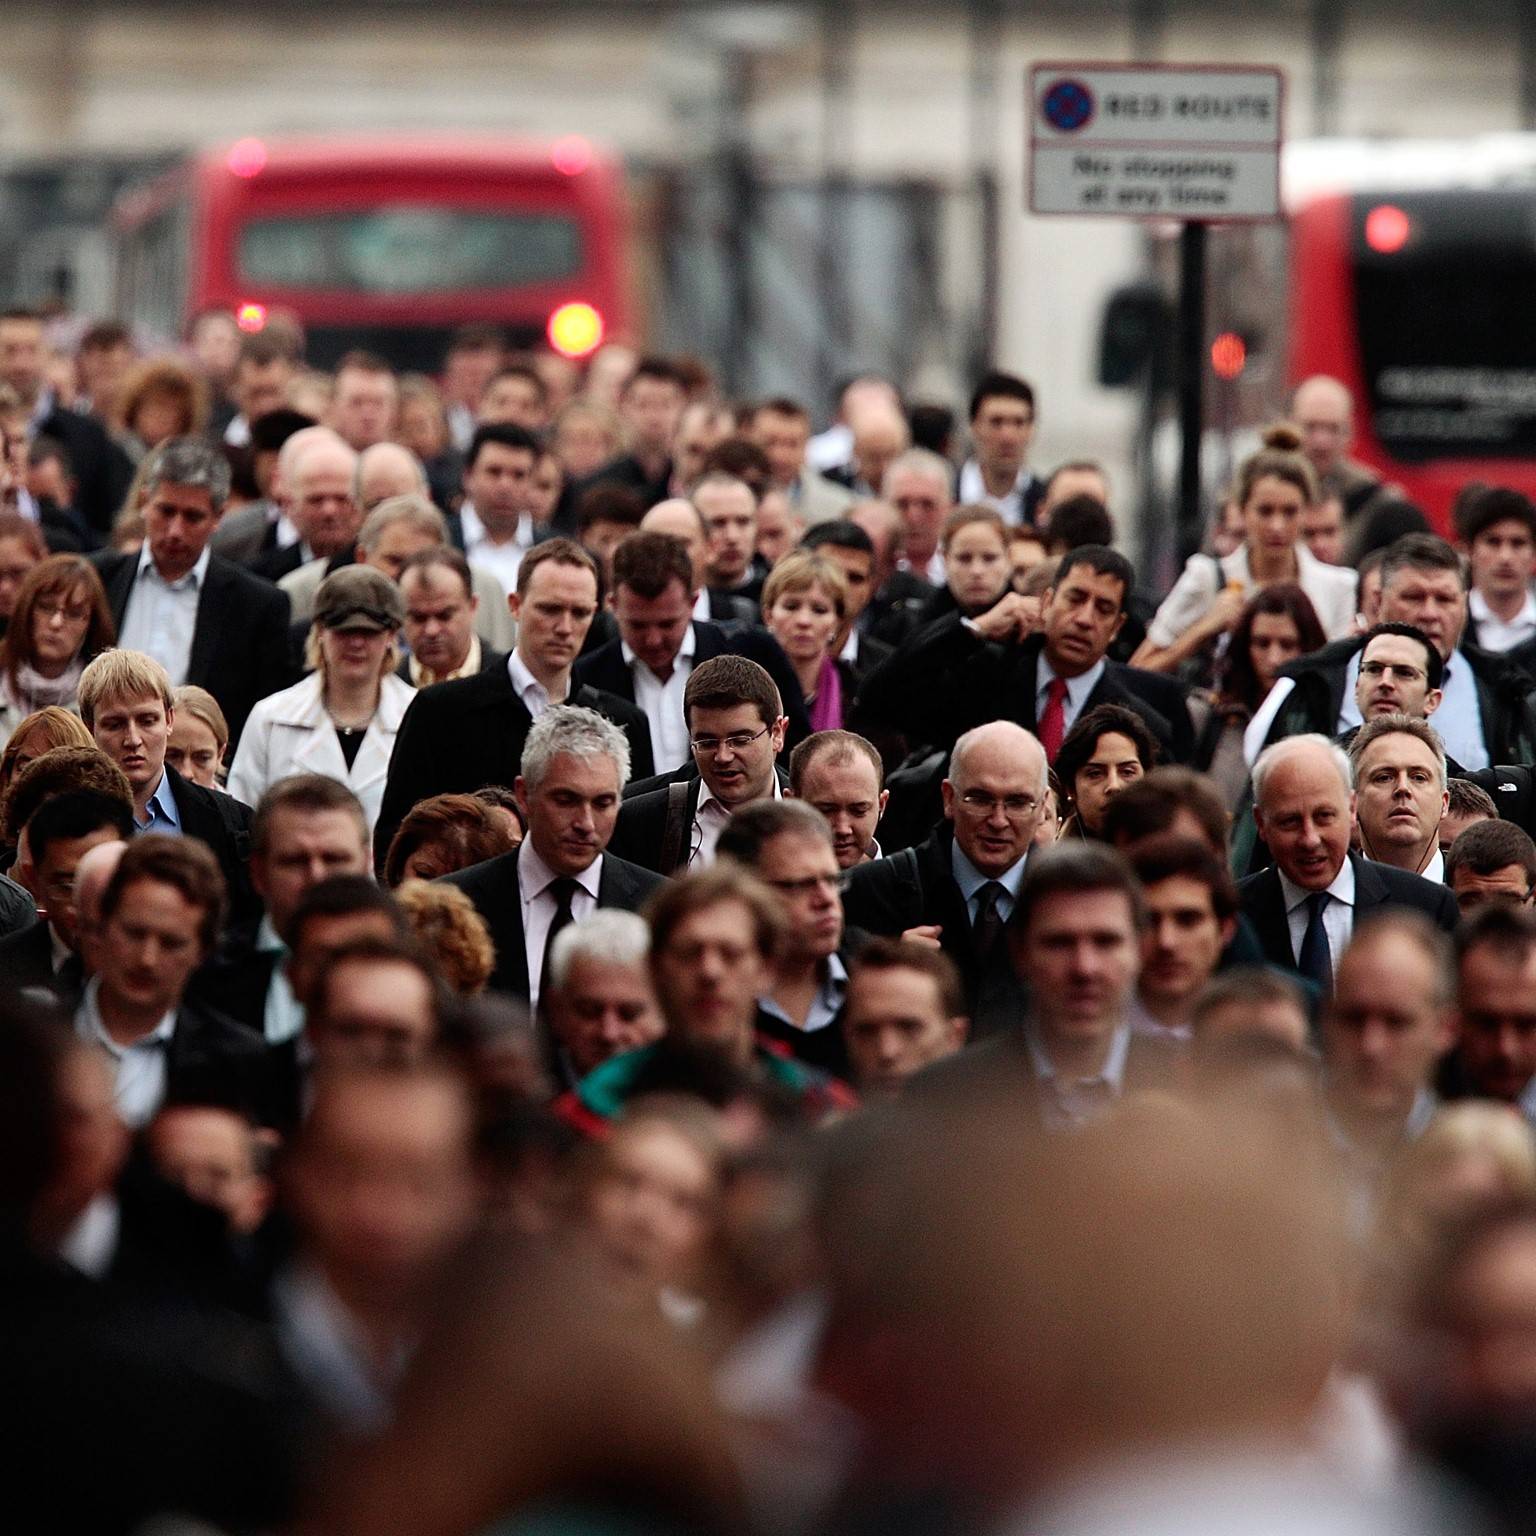 Long commutes are major source of poor health and low productivity